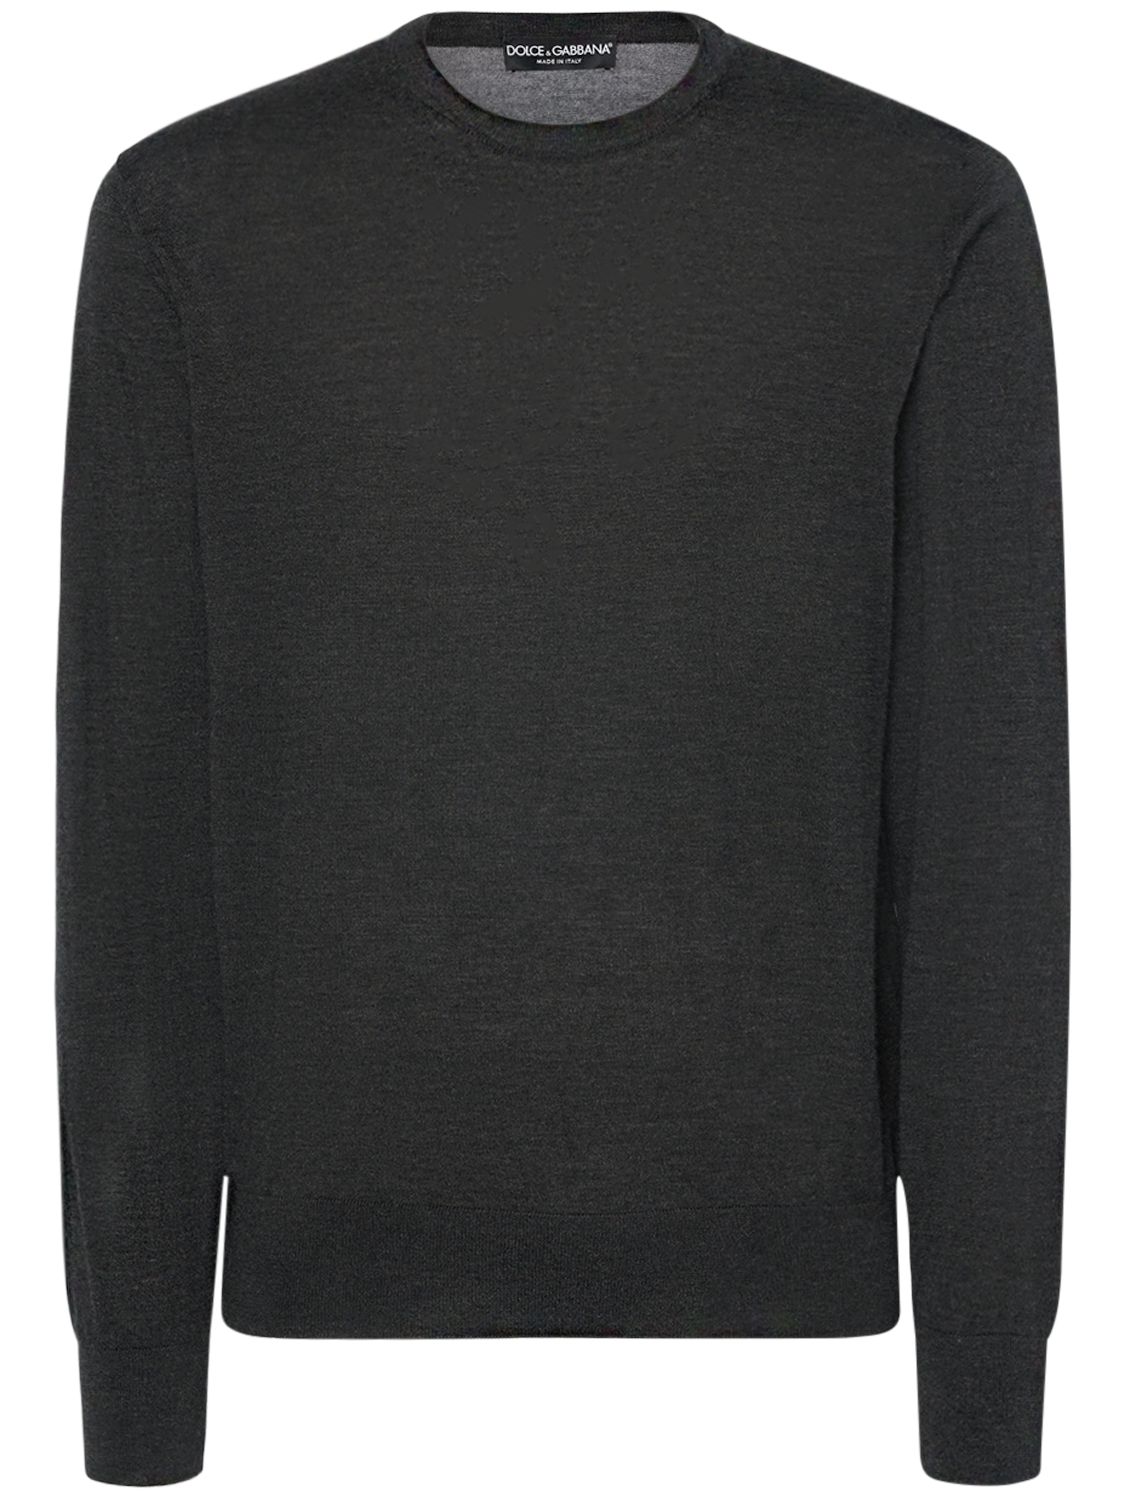 Inside Out Cashmere Sweater